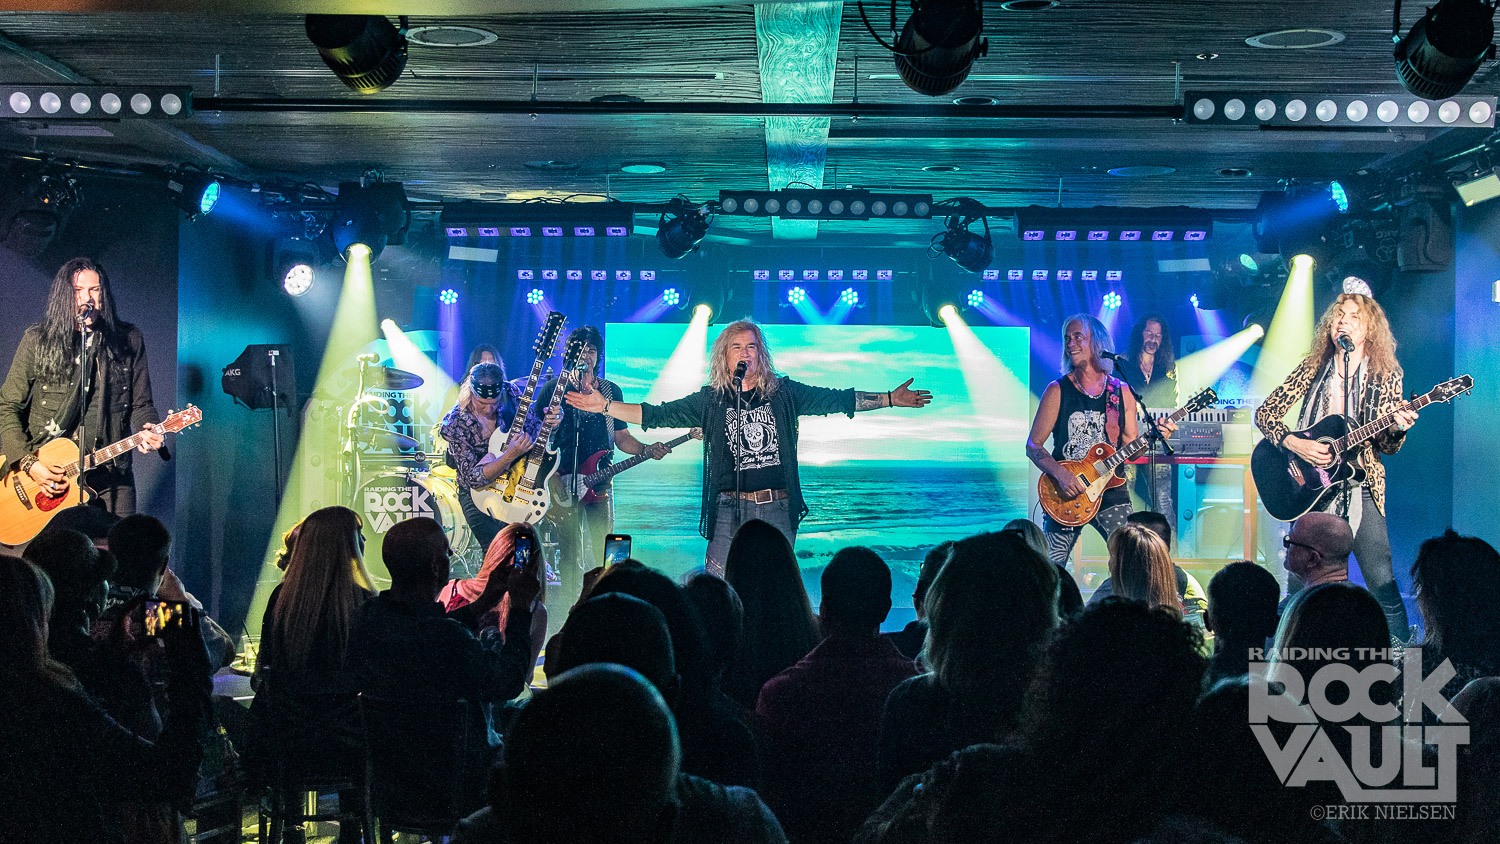 RAIDING THE ROCK VAULT  INCREASES SHOW SCHEDULE TO 5-NIGHTS A WEEK AT THE RIO ALL-SUITE HOTEL & CASINO